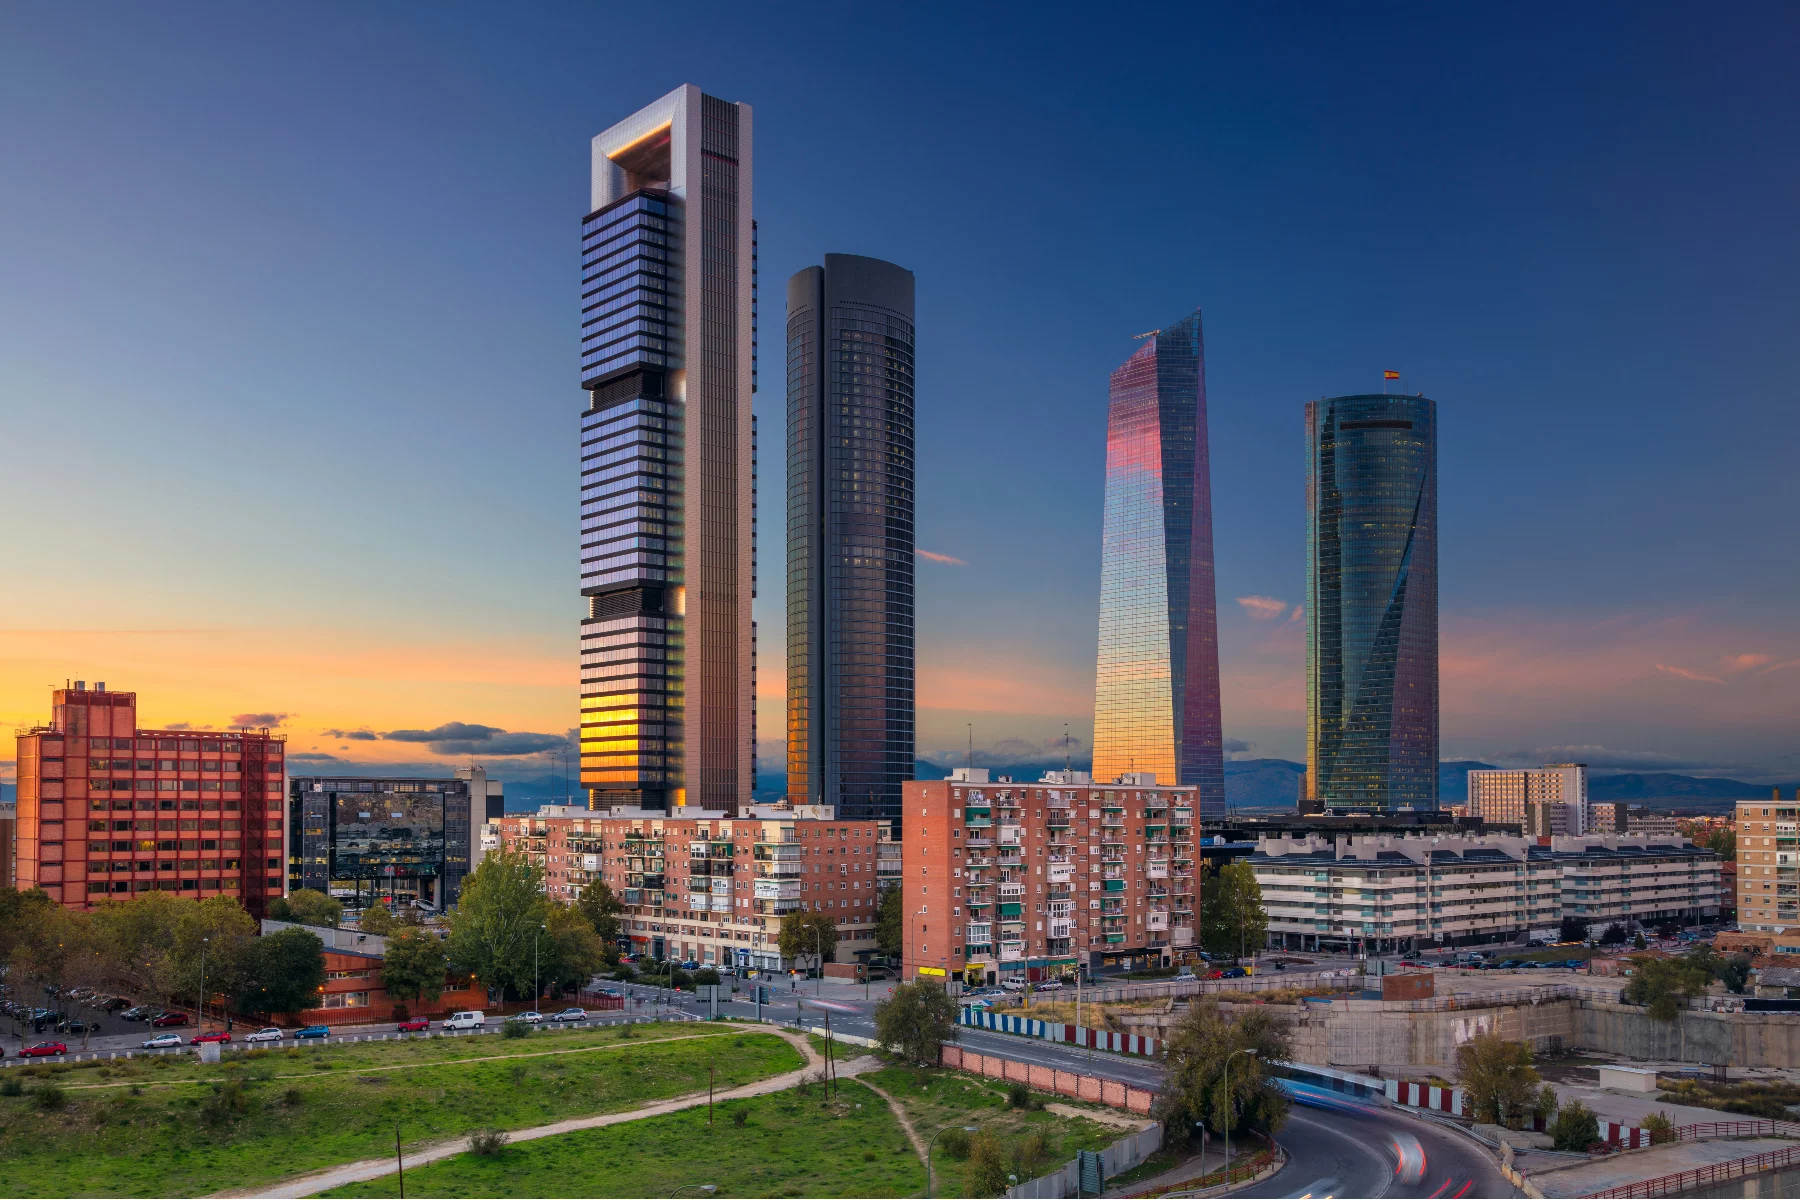 Madrid business district